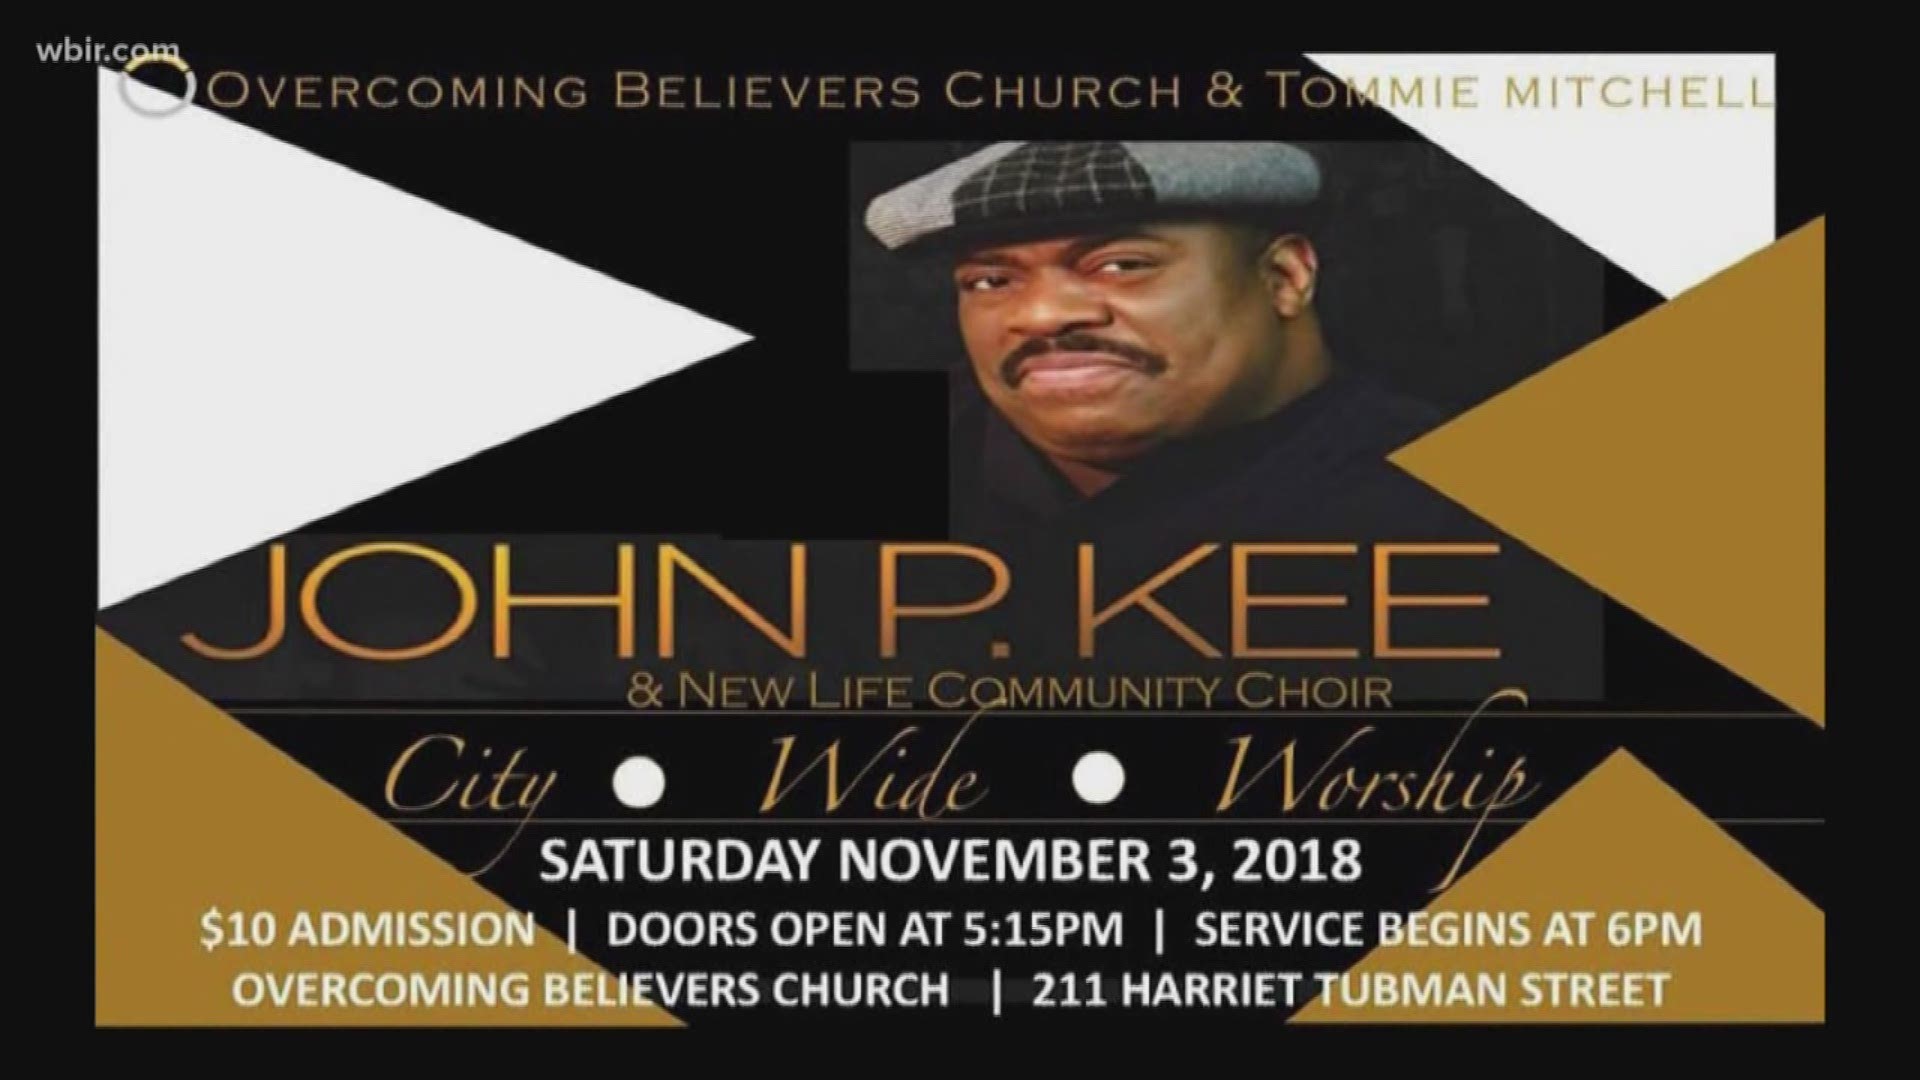 John P. Kee & New Life Community choir will perform in a 
City Wide Worship concert on Saturday, Nov. 3 at Overcoming Believers Church. The concert is $10 and starts at 6pm. For more information visit facebook.com/OvercomingBelieversChurch
Nov. 1, 2018-4p